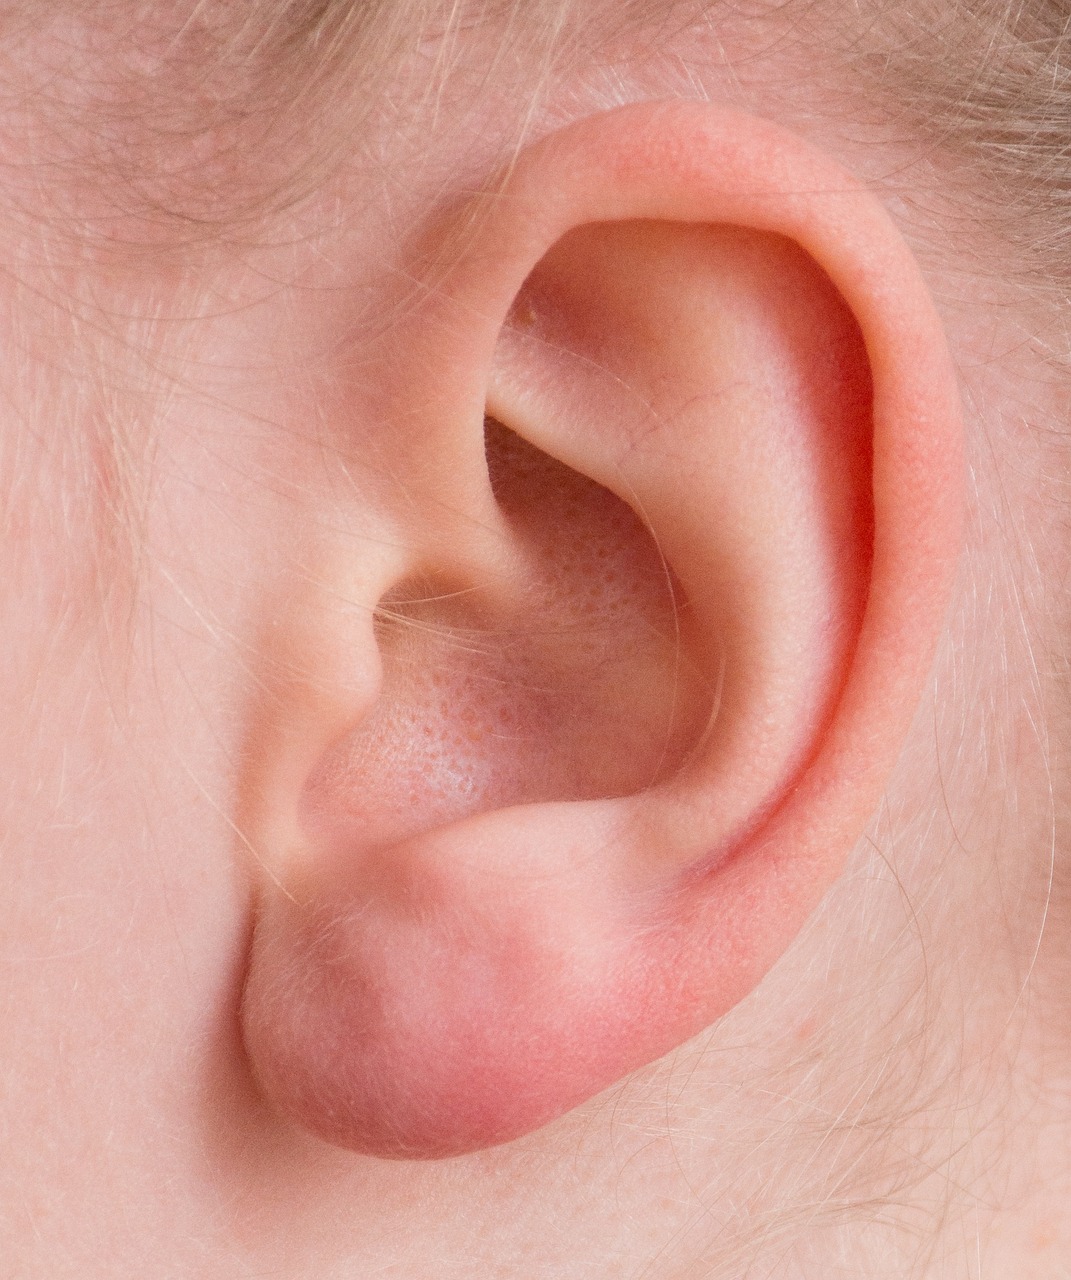 20 Fun Facts About Human Ears